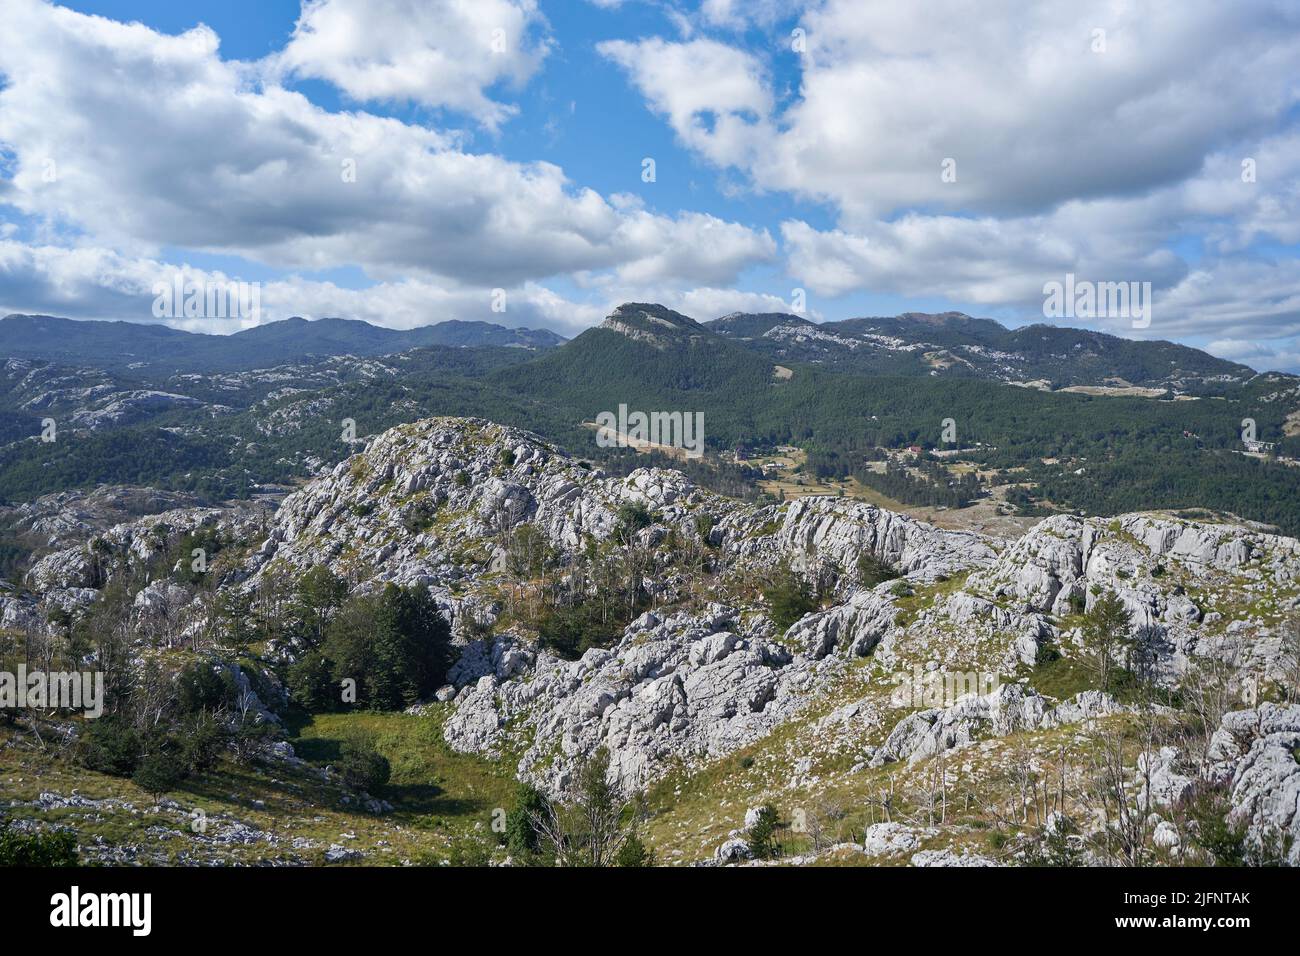 landscape of stone mountains in Montenegro, national park of Lovcen. Stock Photo